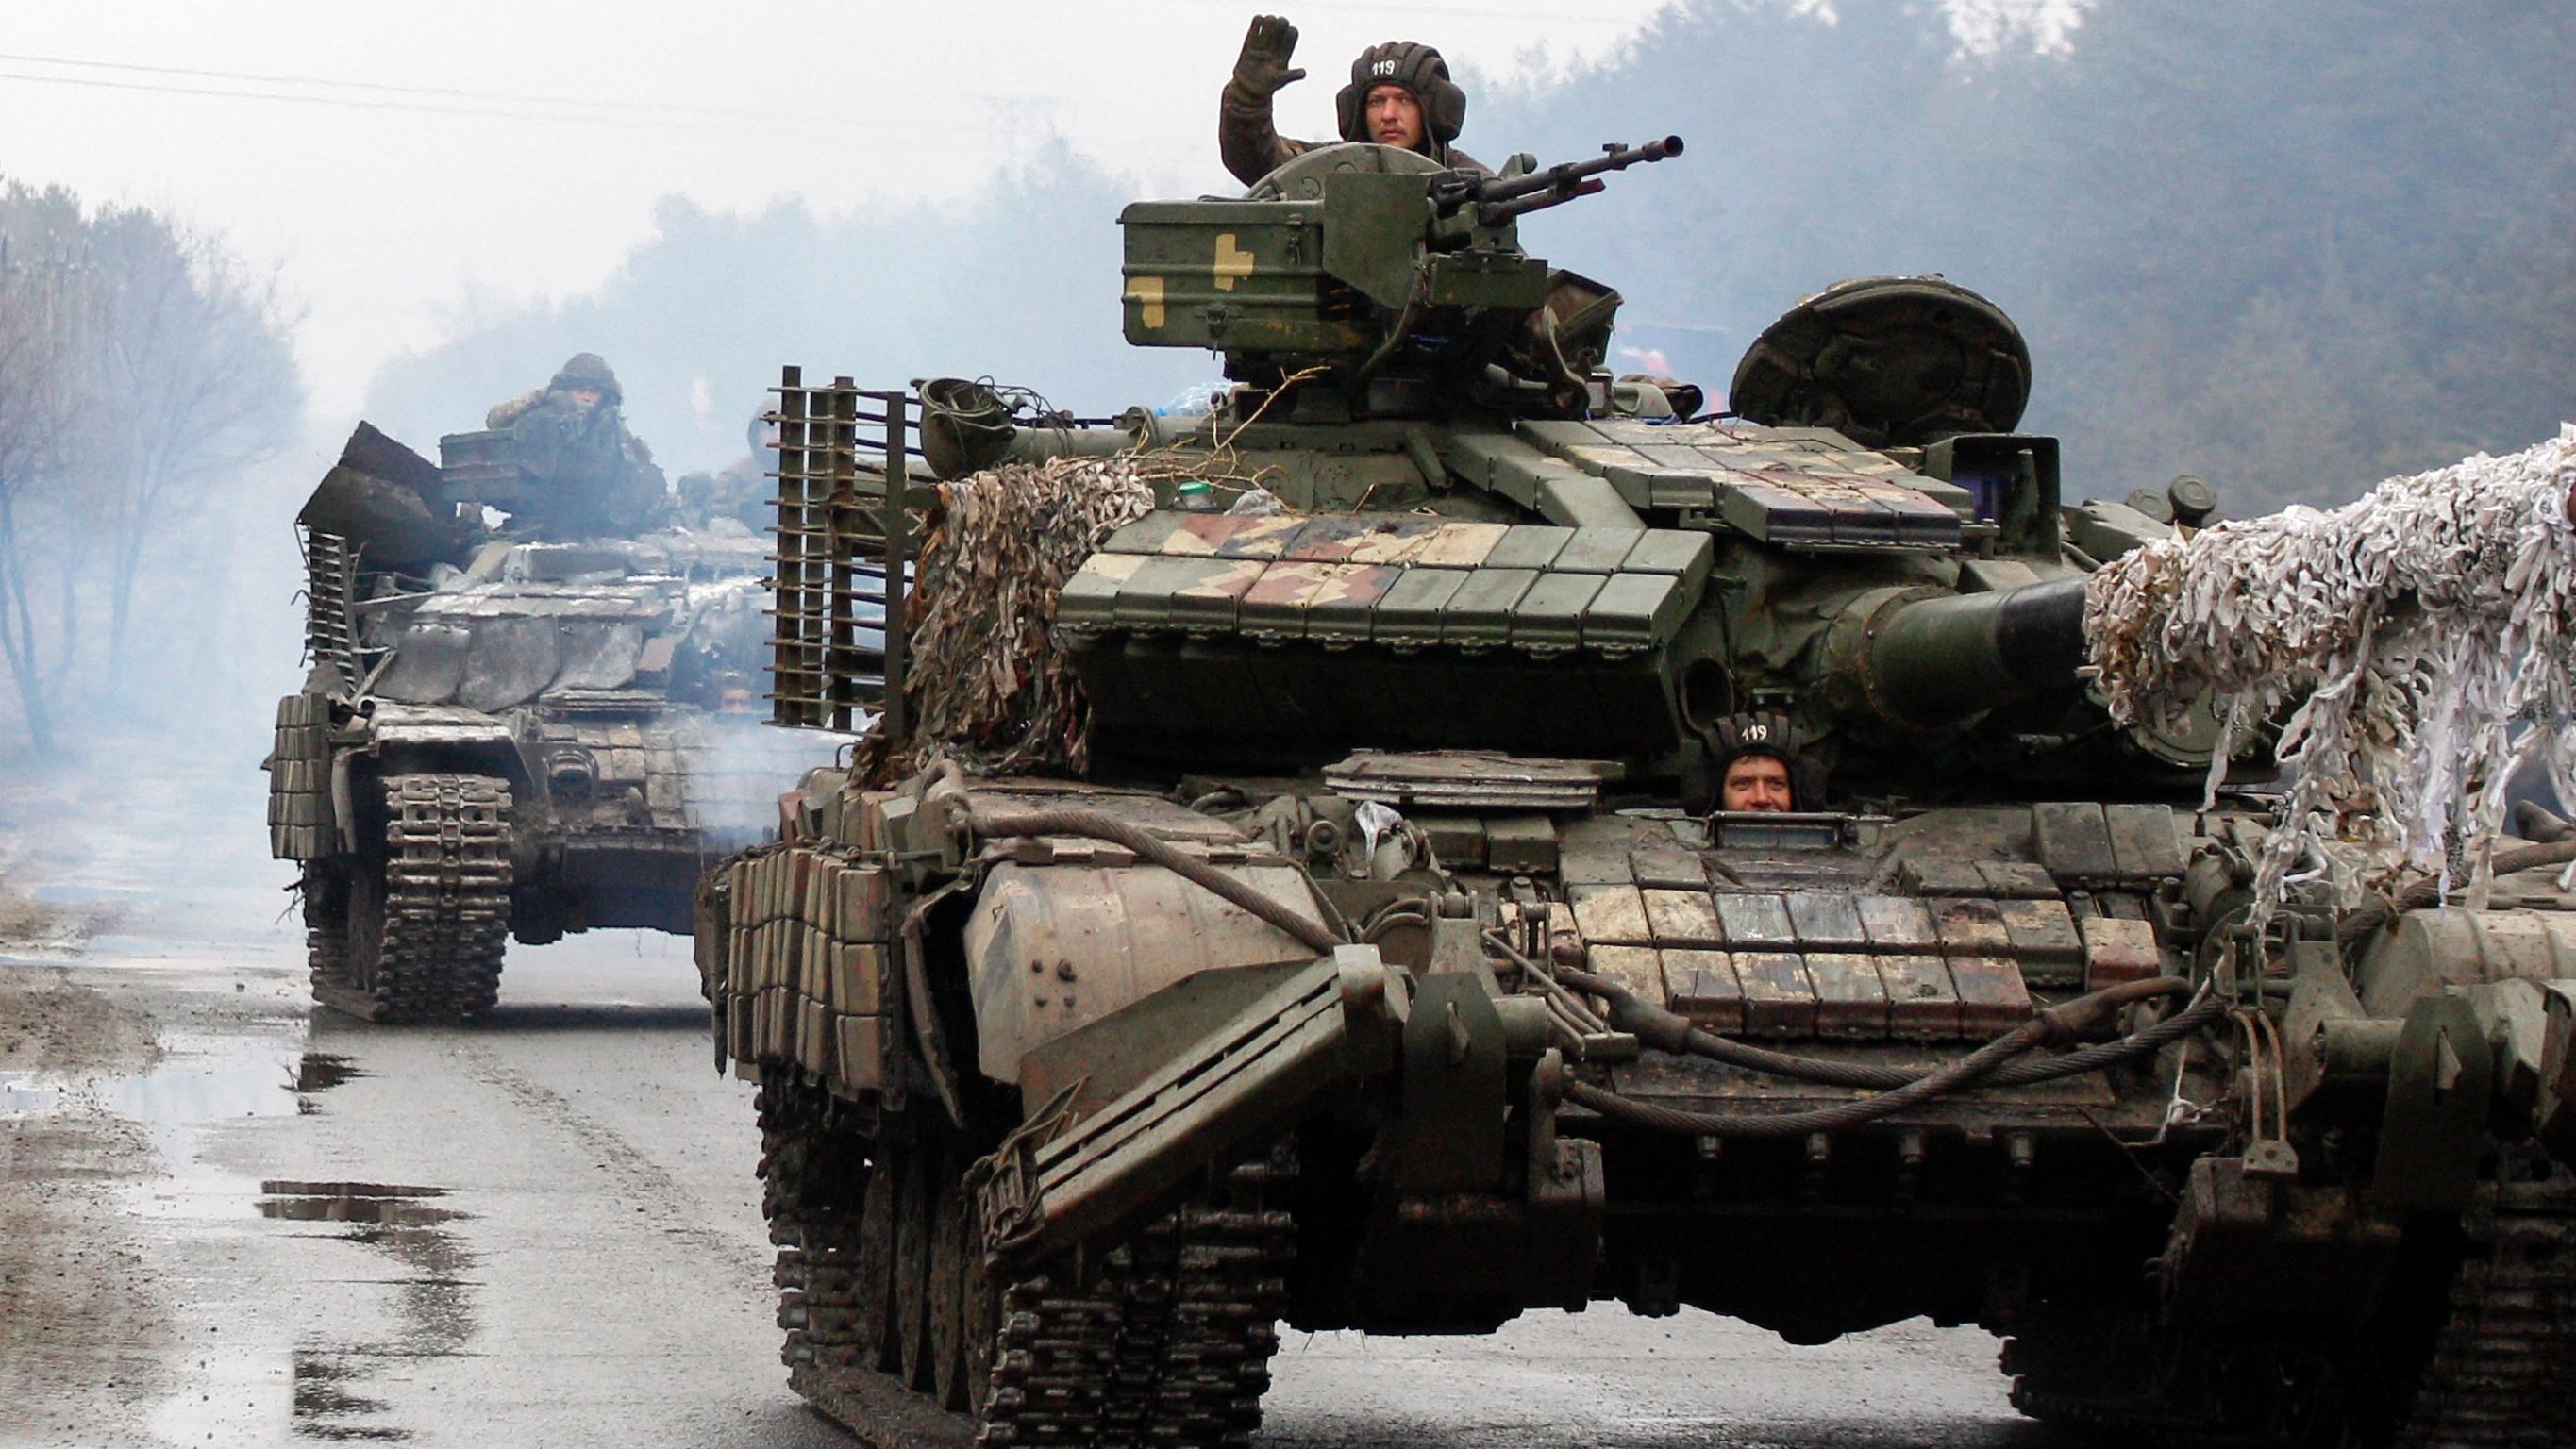 Ukrainian servicemen ride on tanks towards the front line with Russian forces in the Lugansk region of Ukraine in February.